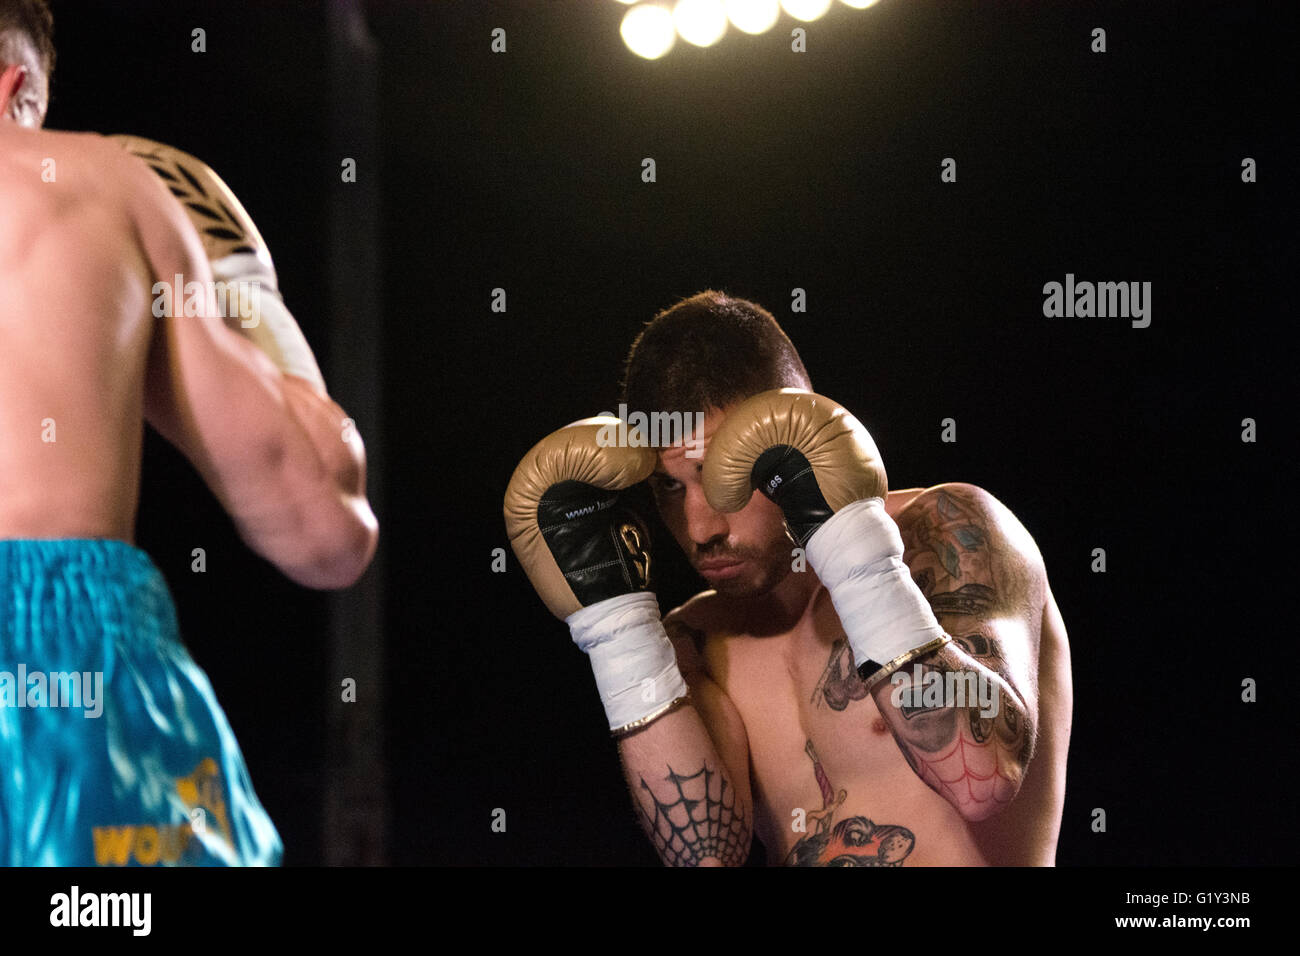 Gijon, Spain. 21st May, 2016. Marc Vidal during the boxing match against Juancho Gonzalez of Spanish national featherweight boxing championships at Sports Center on May 21, 2016 in Gijon, Spain. Credit: David Gato/Alamy Live News Stock Photo